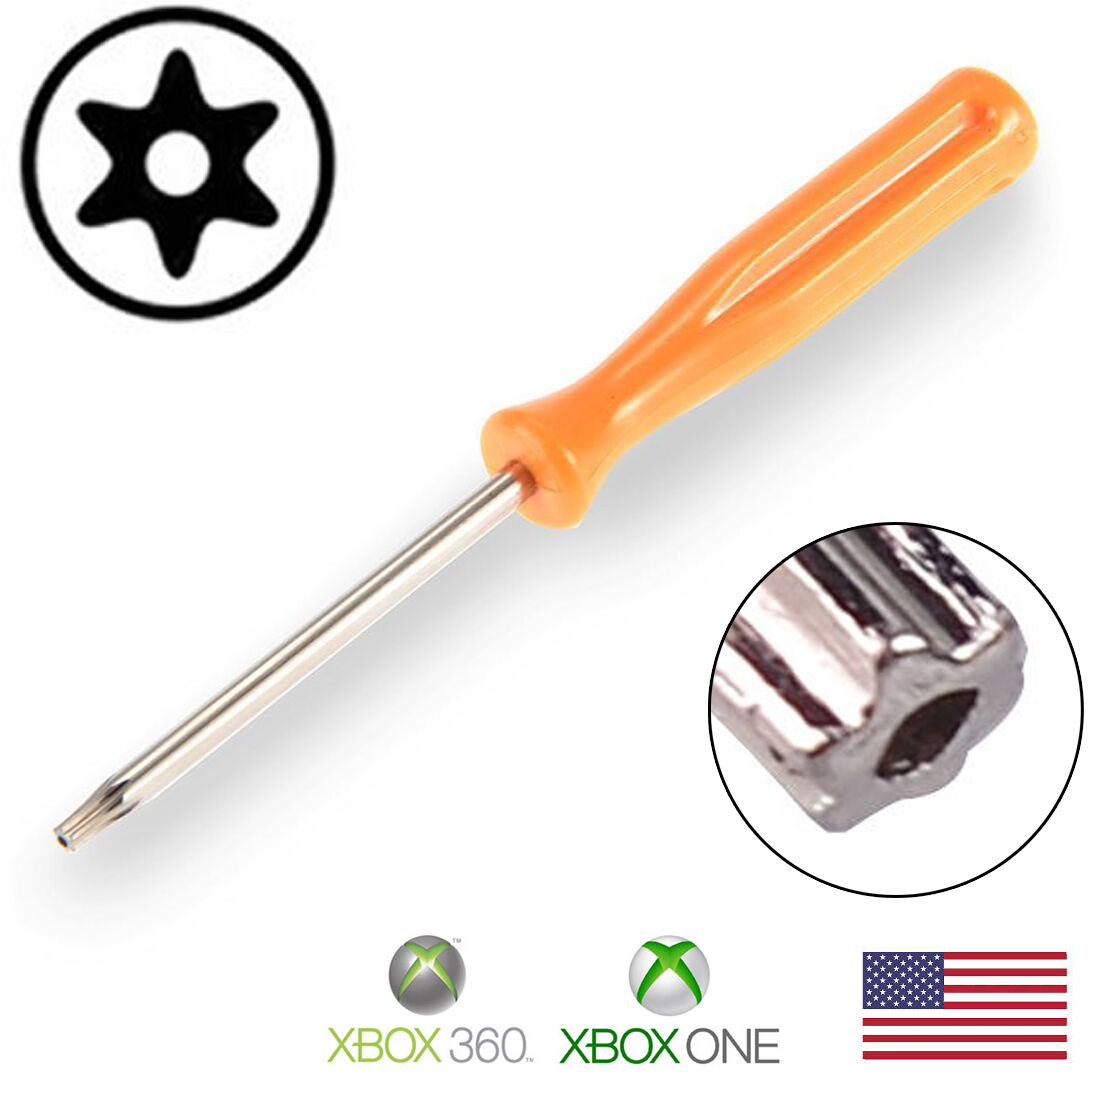 T8 Torx Security Screwdriver For Xbox 360 Controller - Brand New Usa